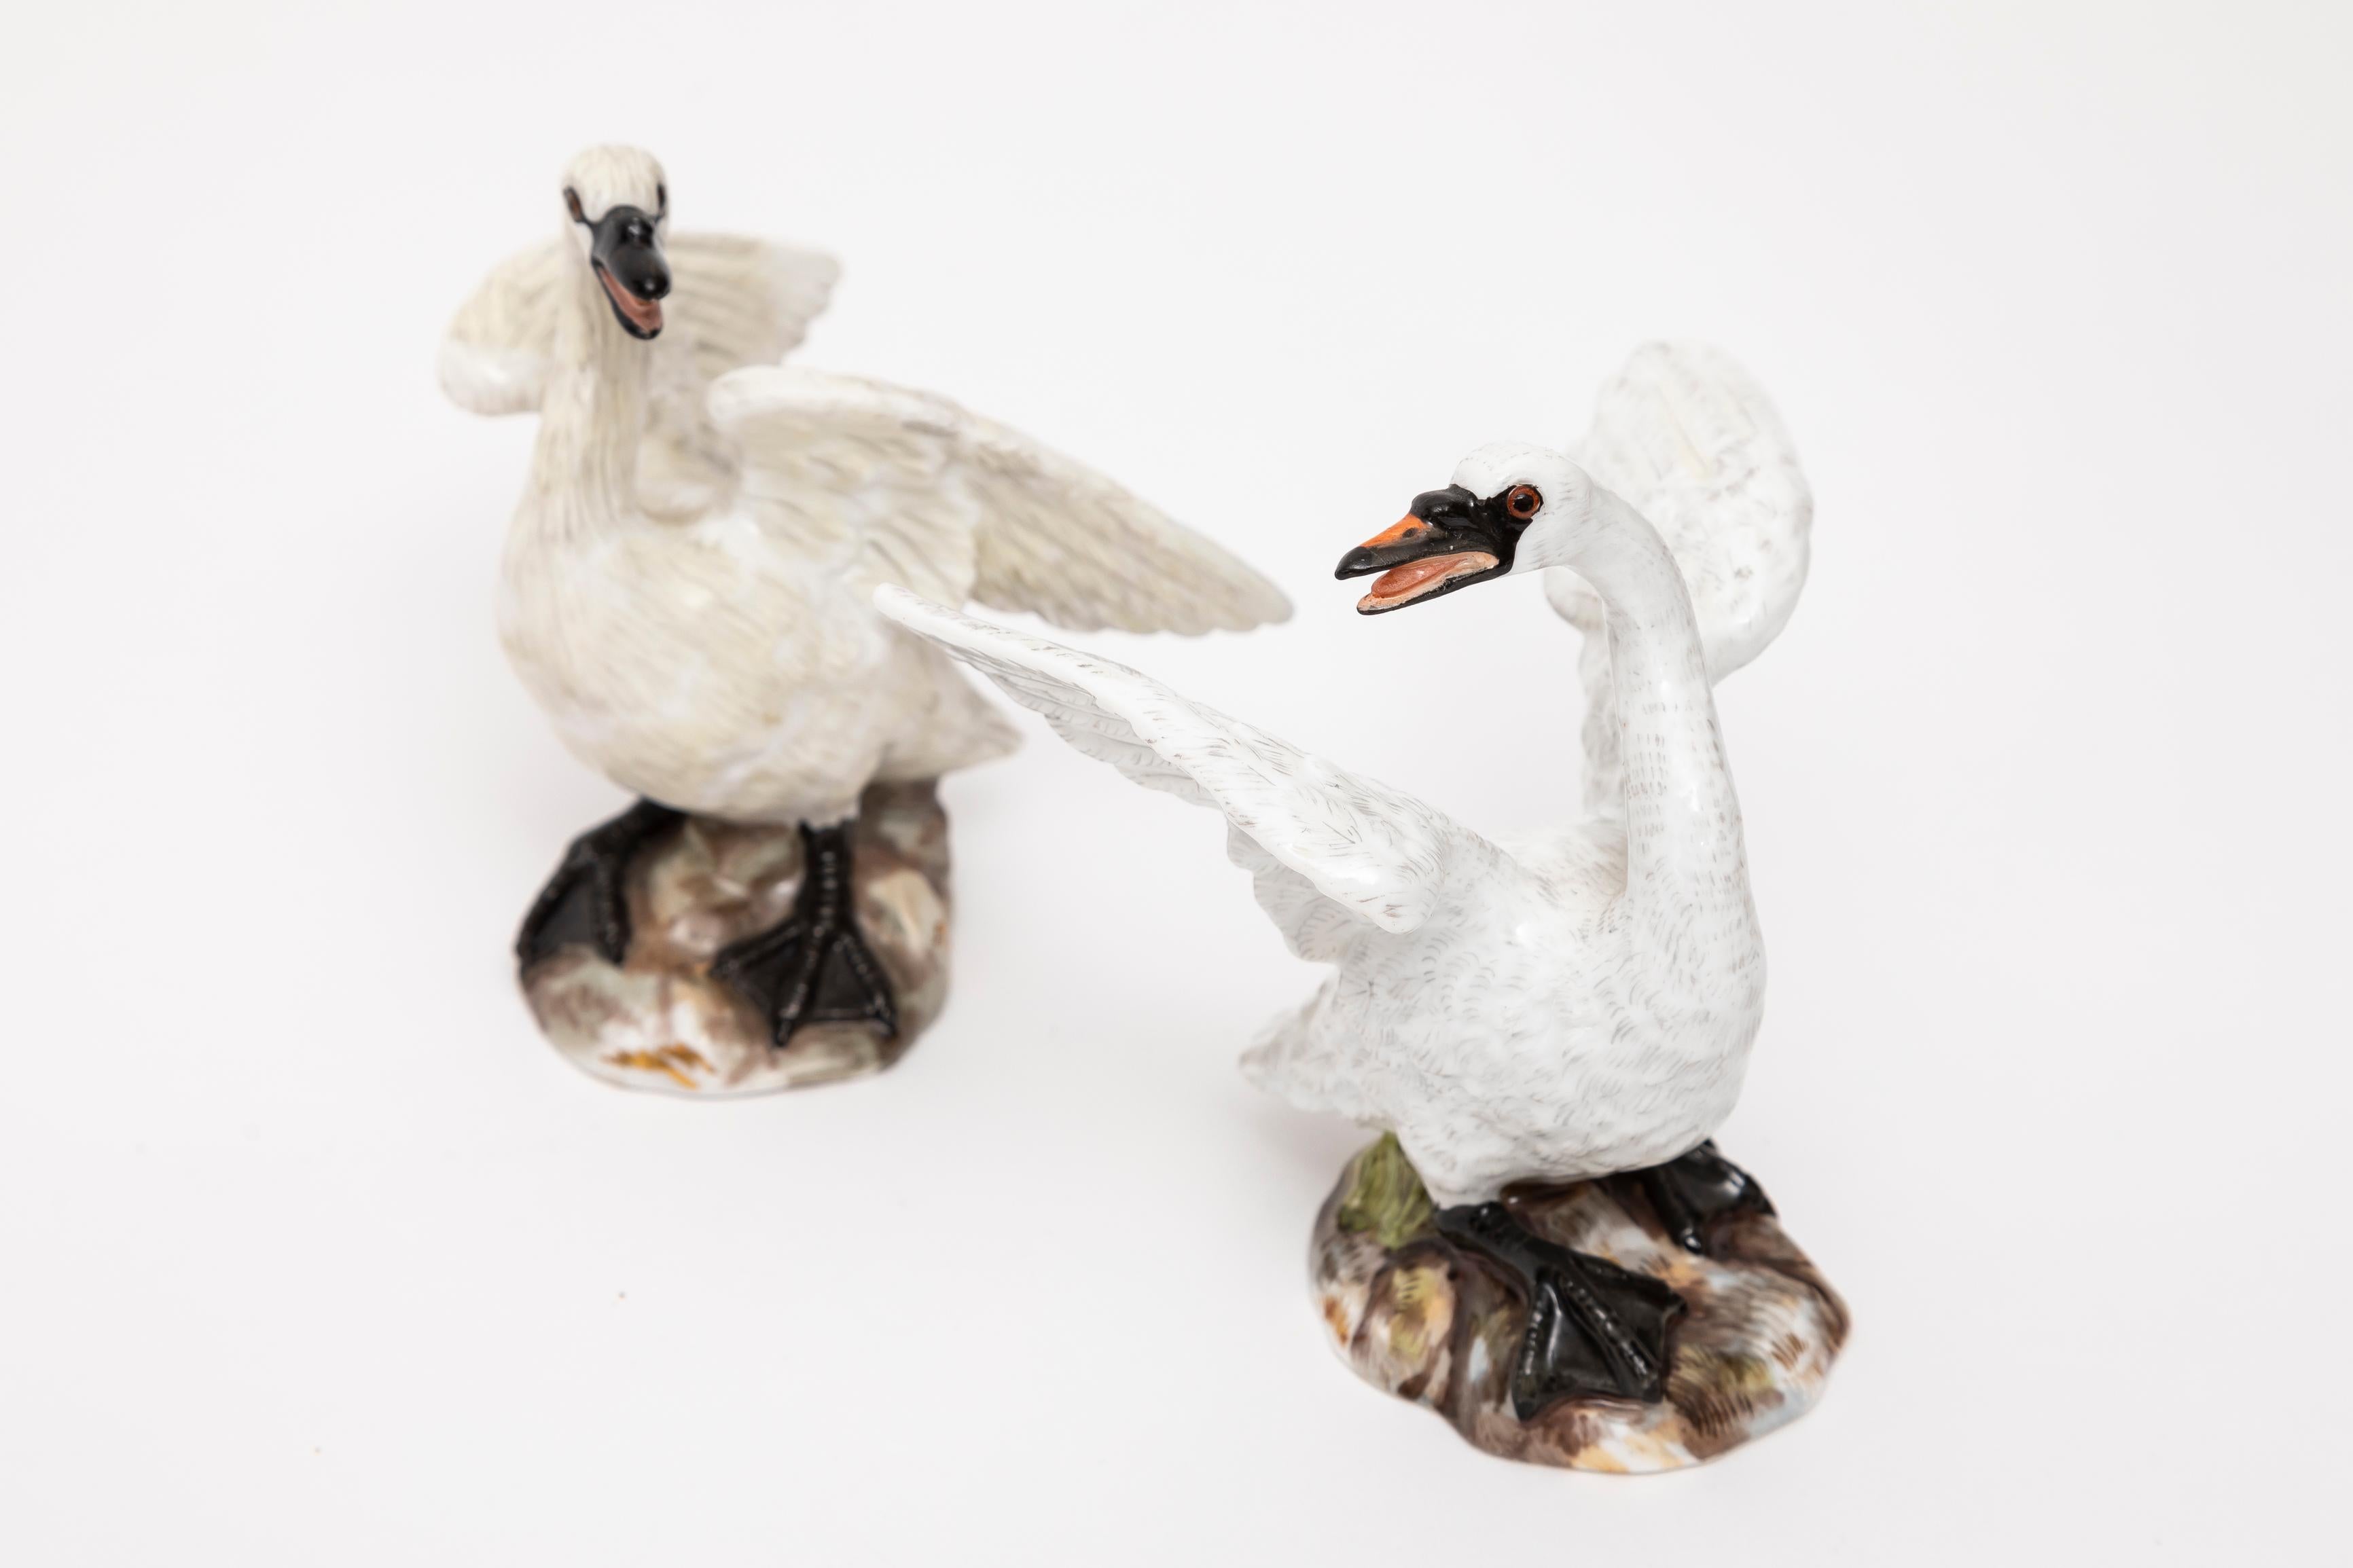 A Pair of Early 19th Century Meissen Porcelain Figures of Swans.  This pair of swans portrays the graceful form of these birds with a level of artistry that is truly exceptional. The delicate porcelain captures the avian beauty with lifelike